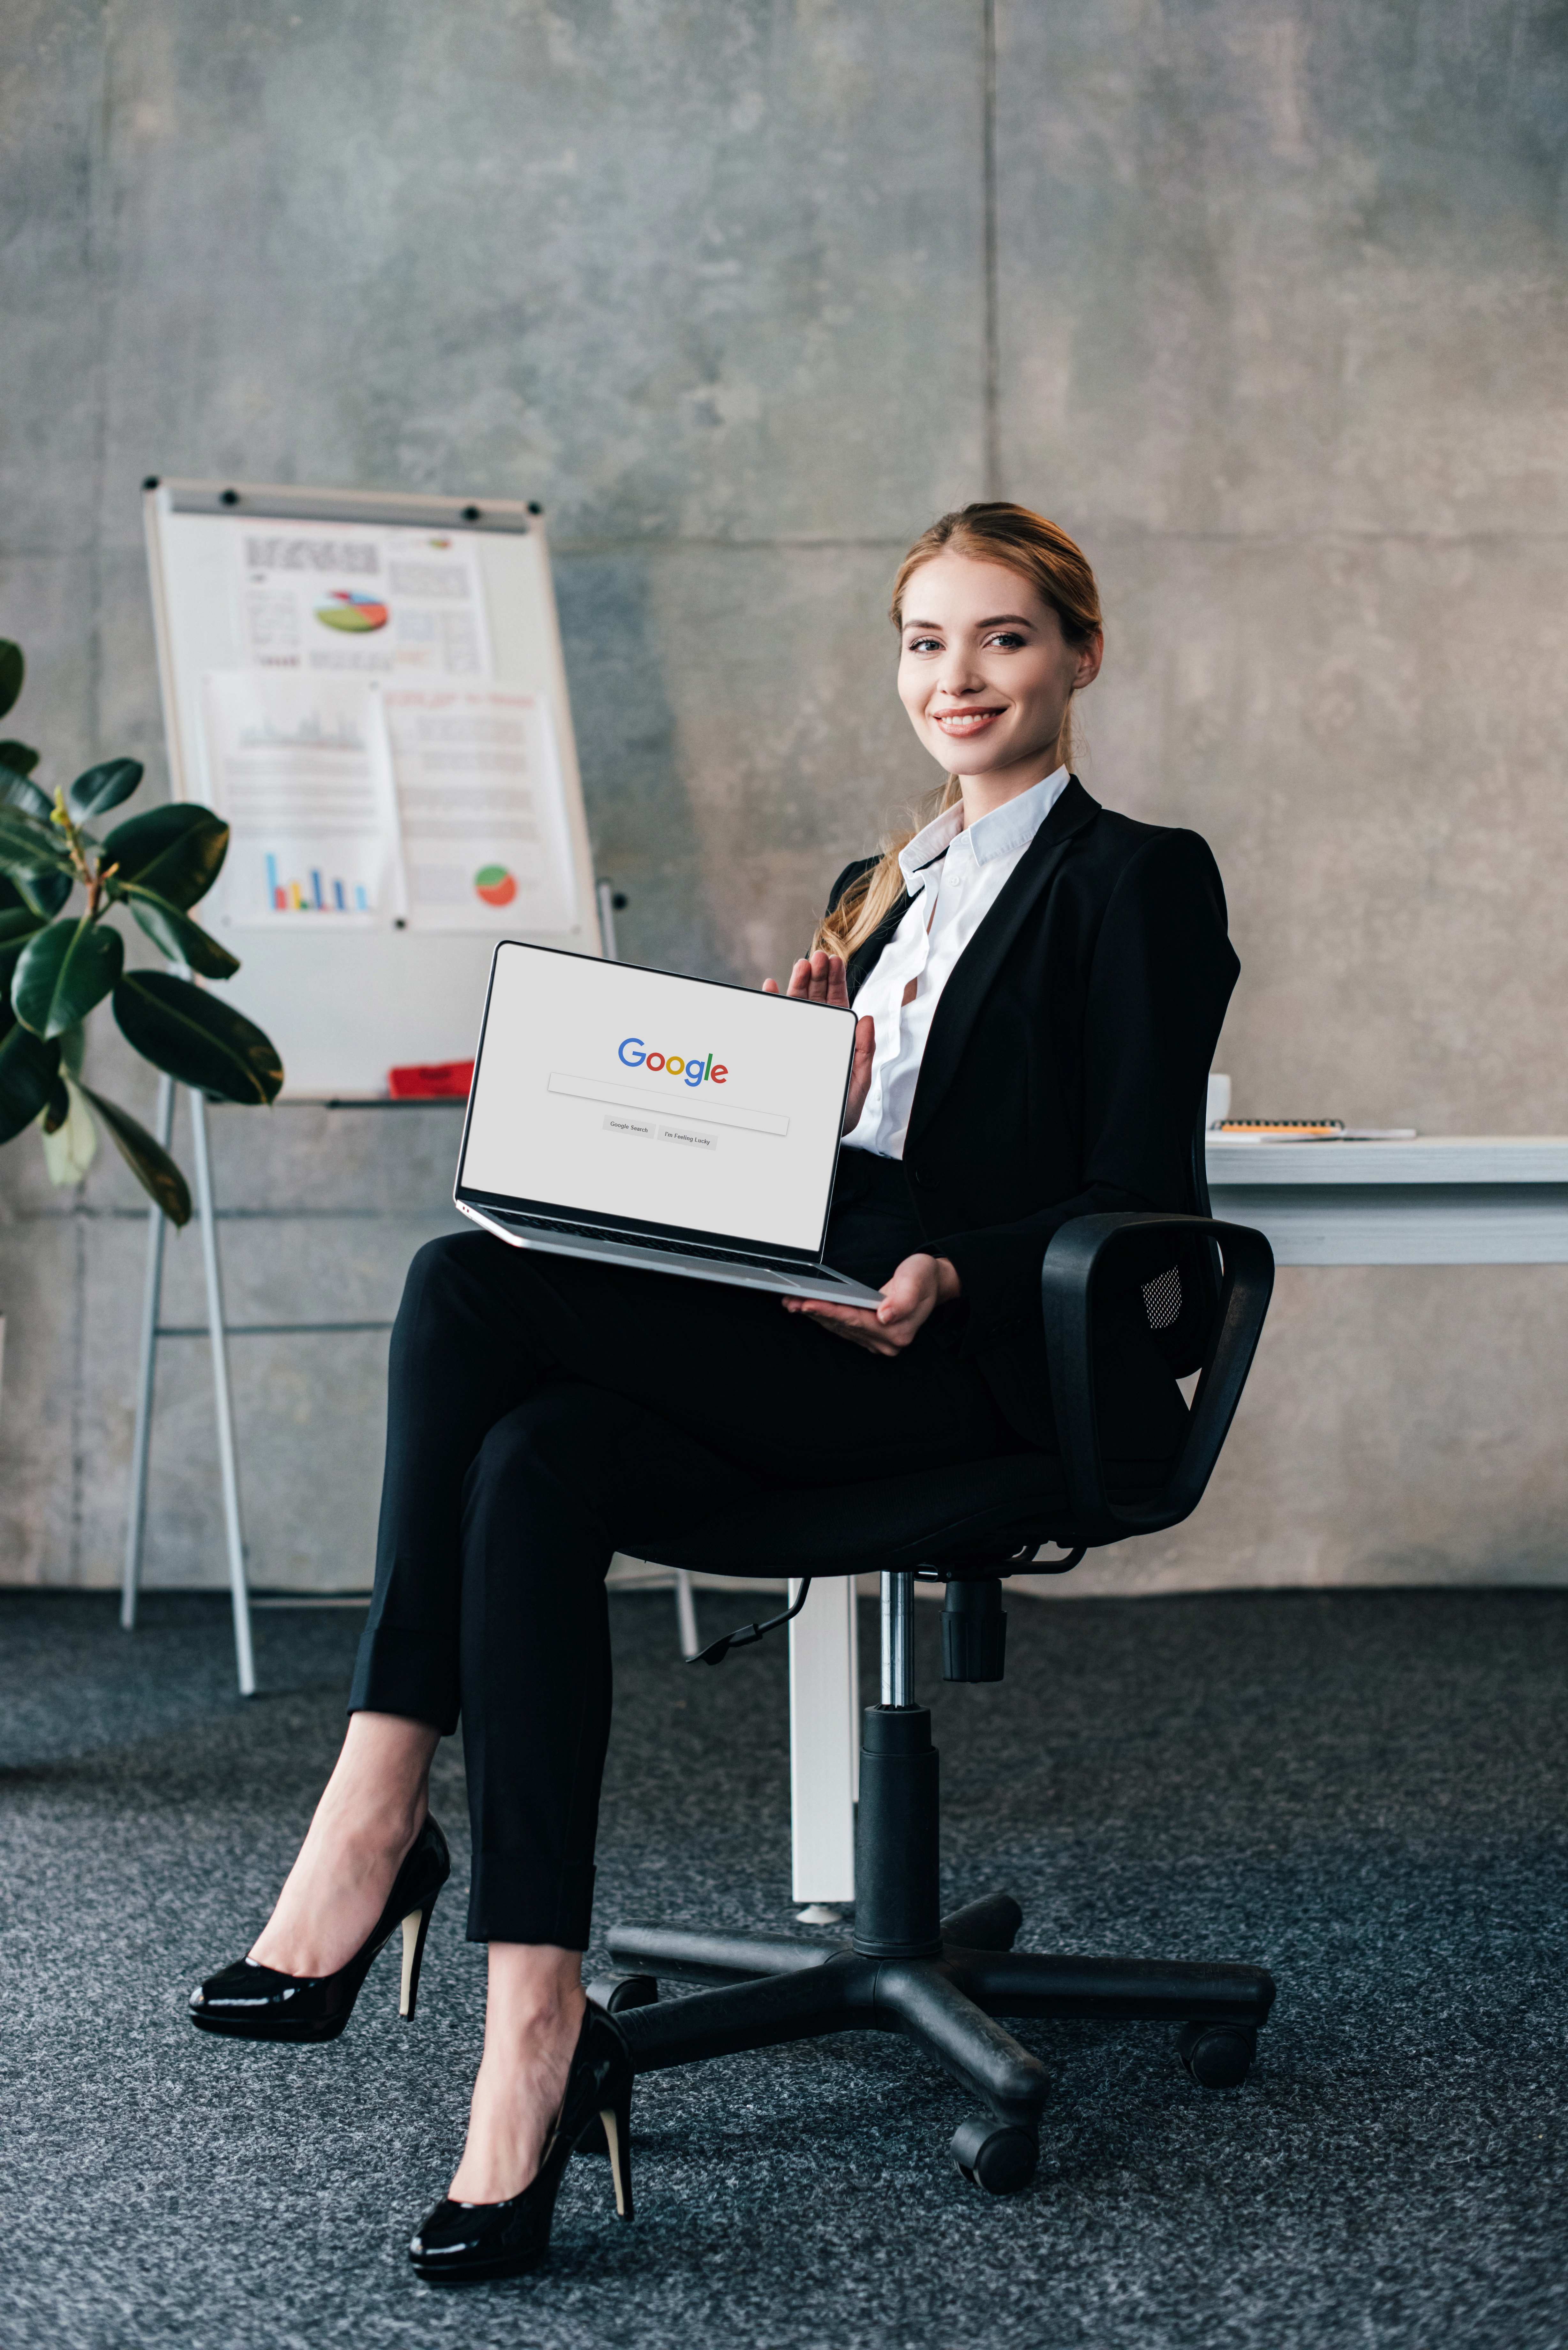 pretty smiling businesswoman sitting in chair and holding laptop with google on display